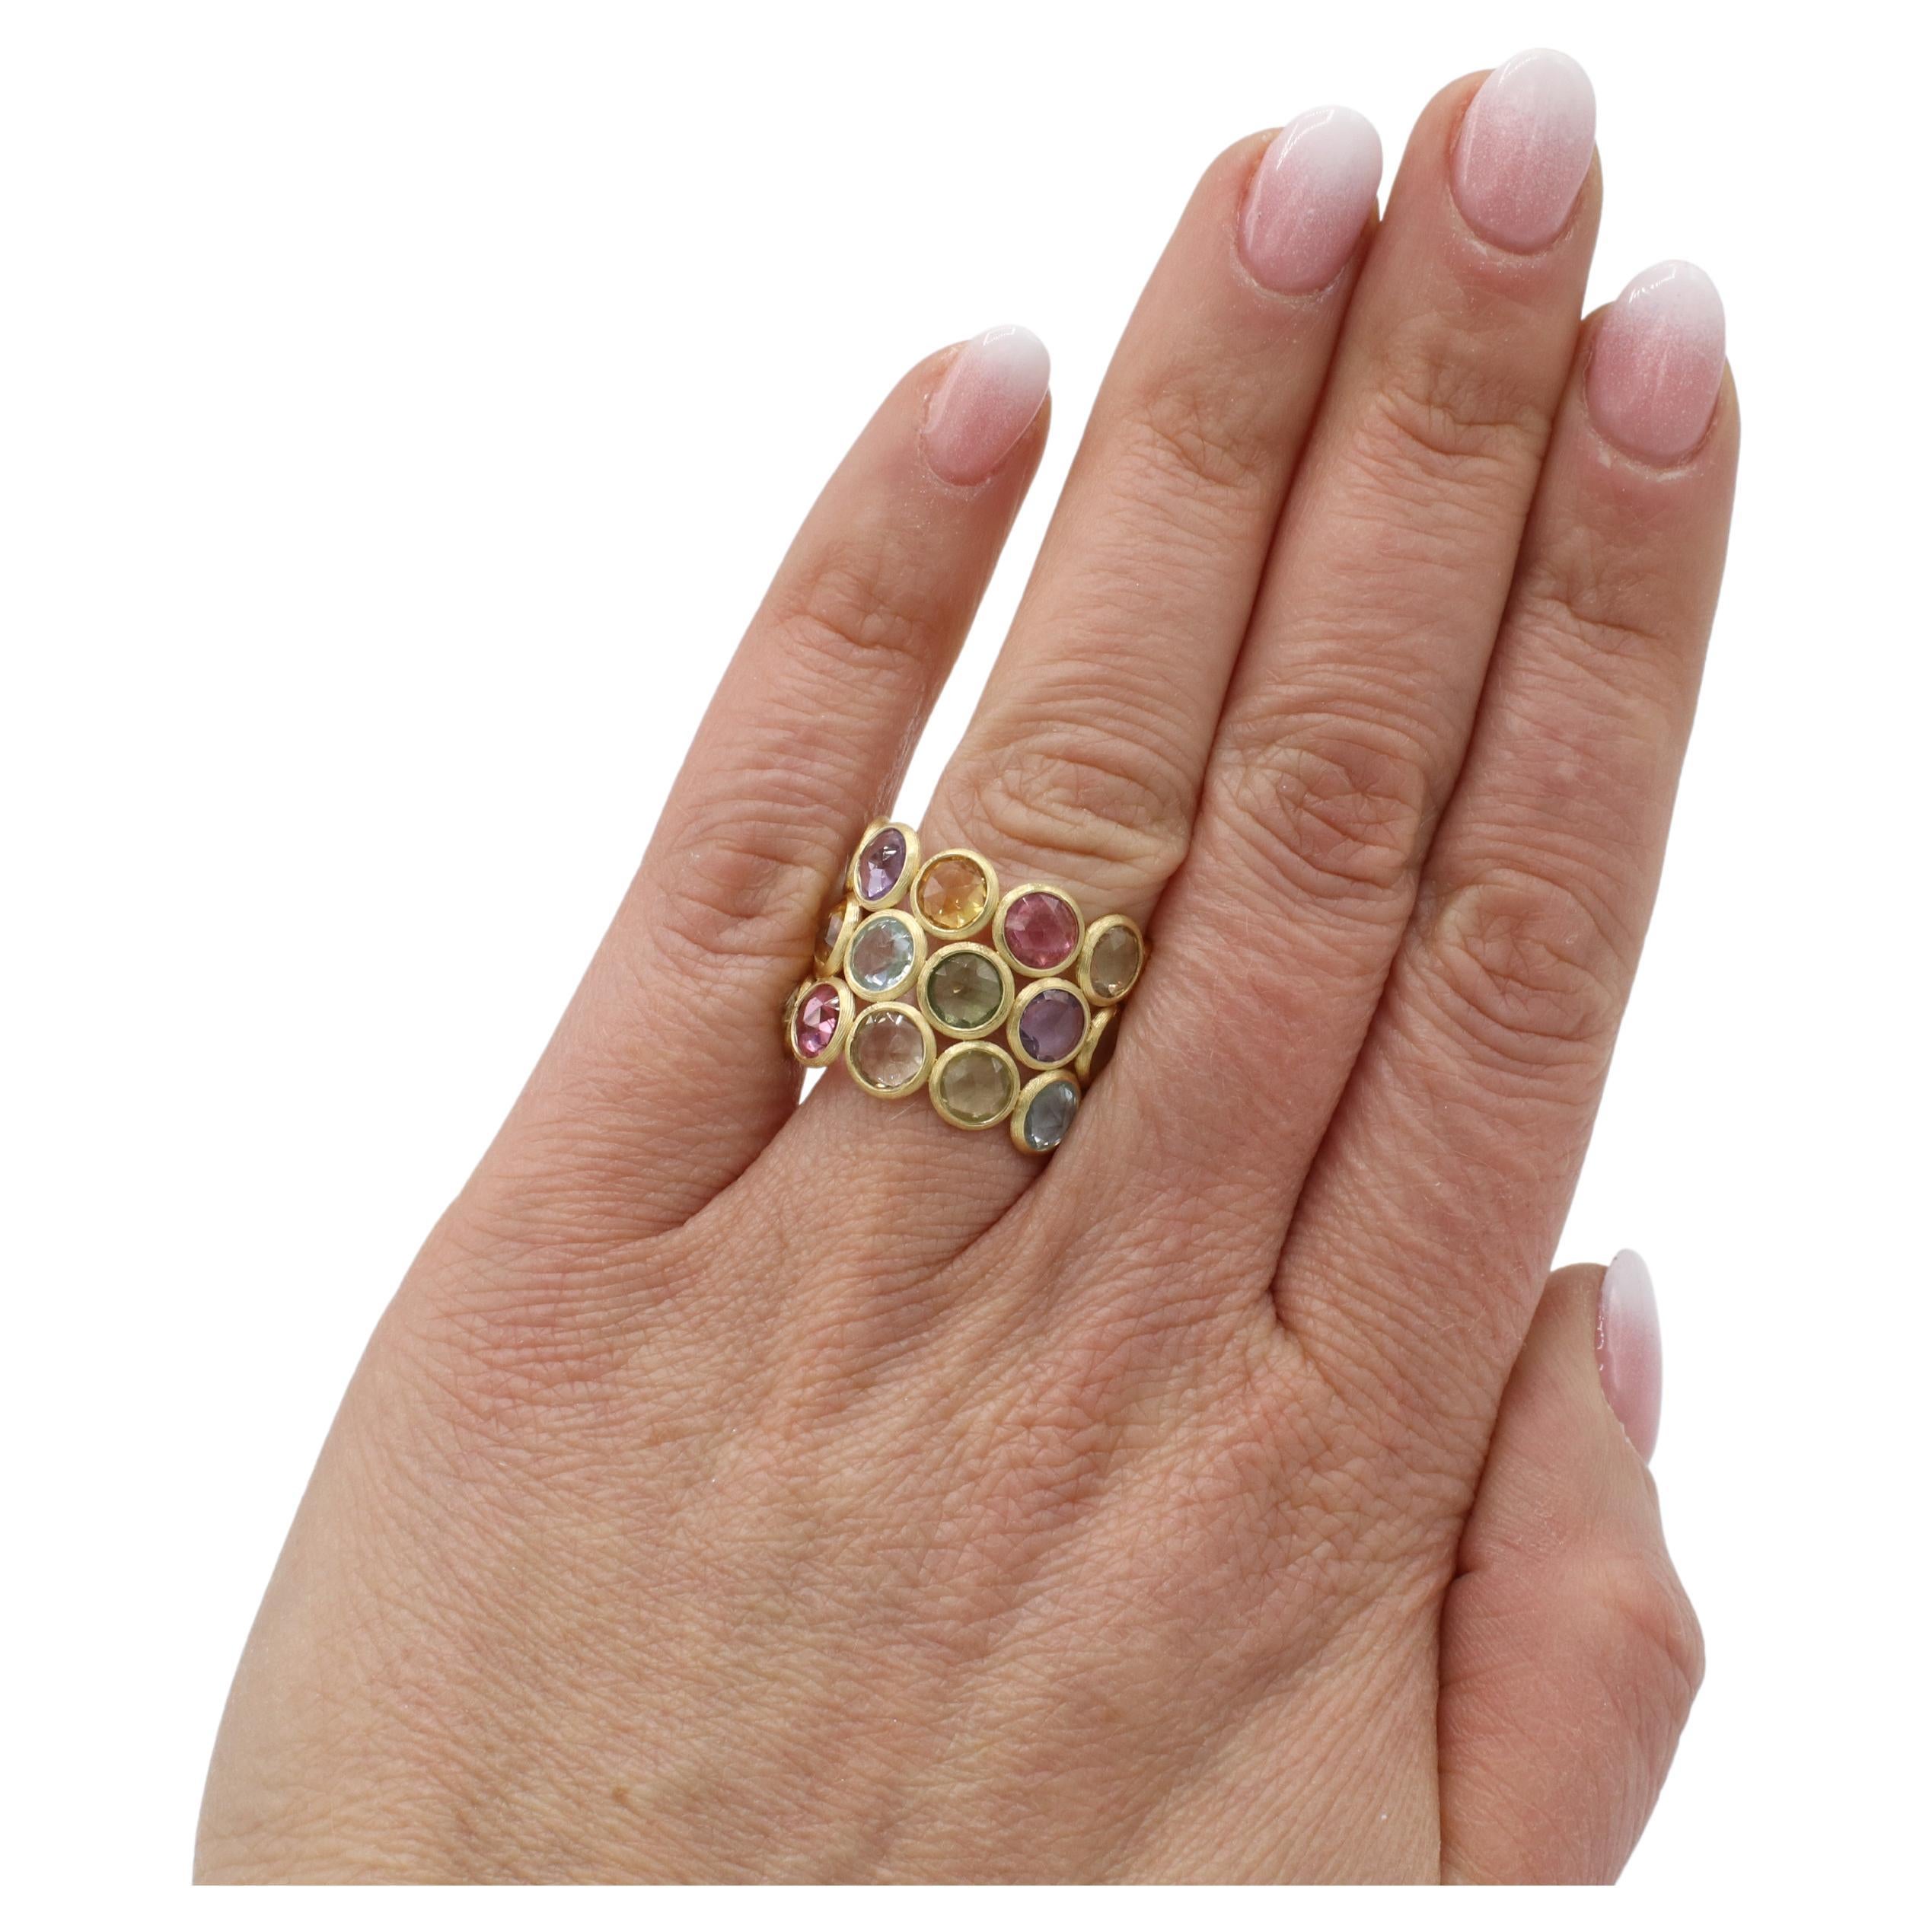 Marco Bicego Jaipur 18 Karat Multi-Colored Gemstone Band Ring  In Excellent Condition For Sale In  Baltimore, MD